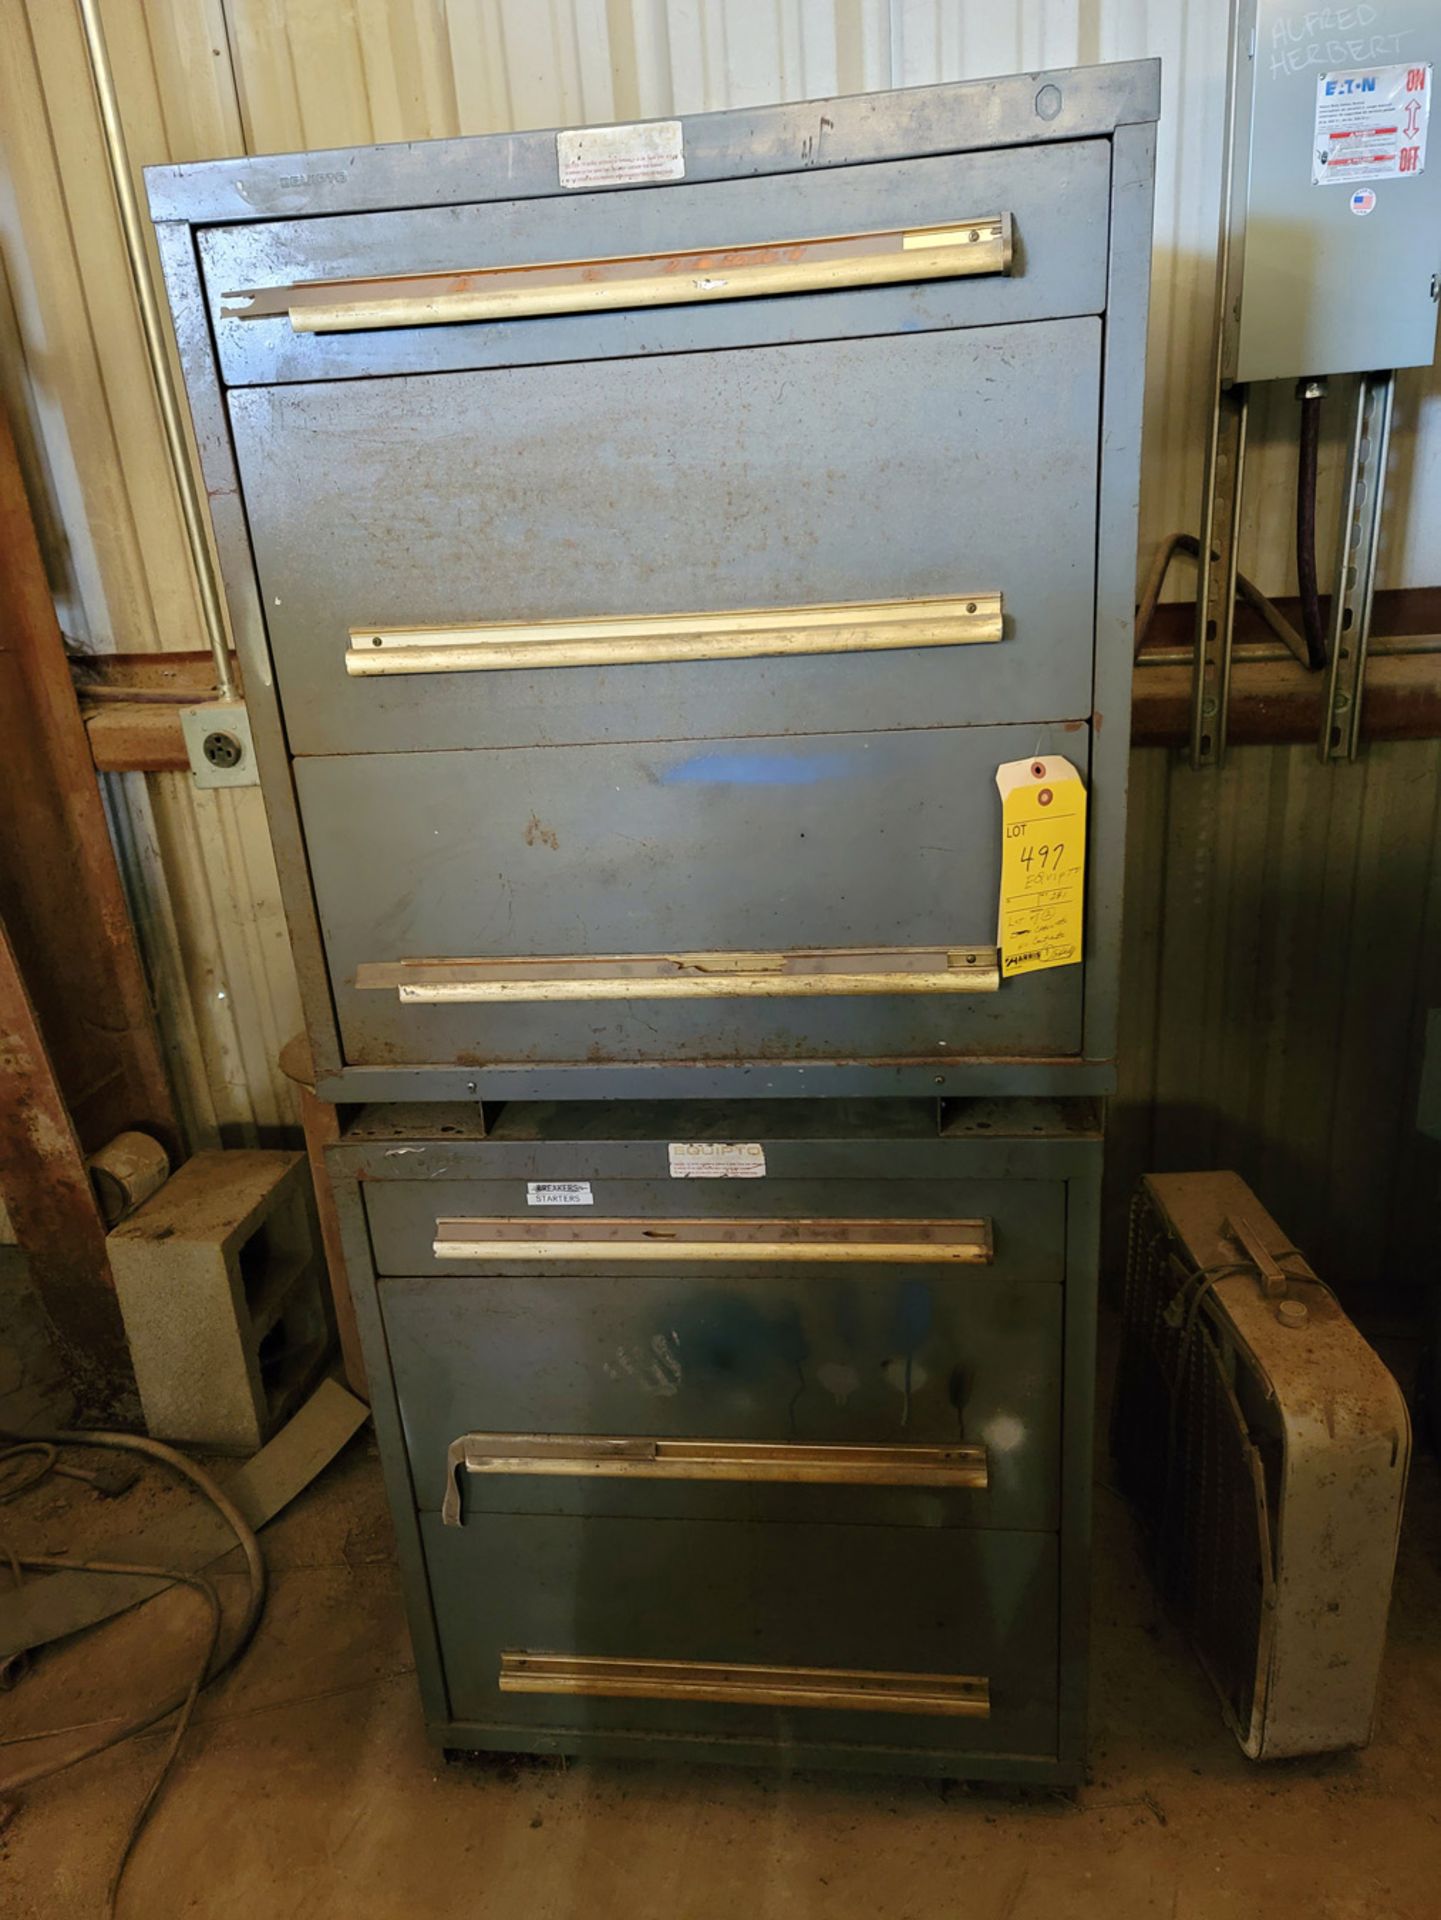 Lot of 3: (2) Equipto Tool Cabinets, (1) Open Shelf - no contents